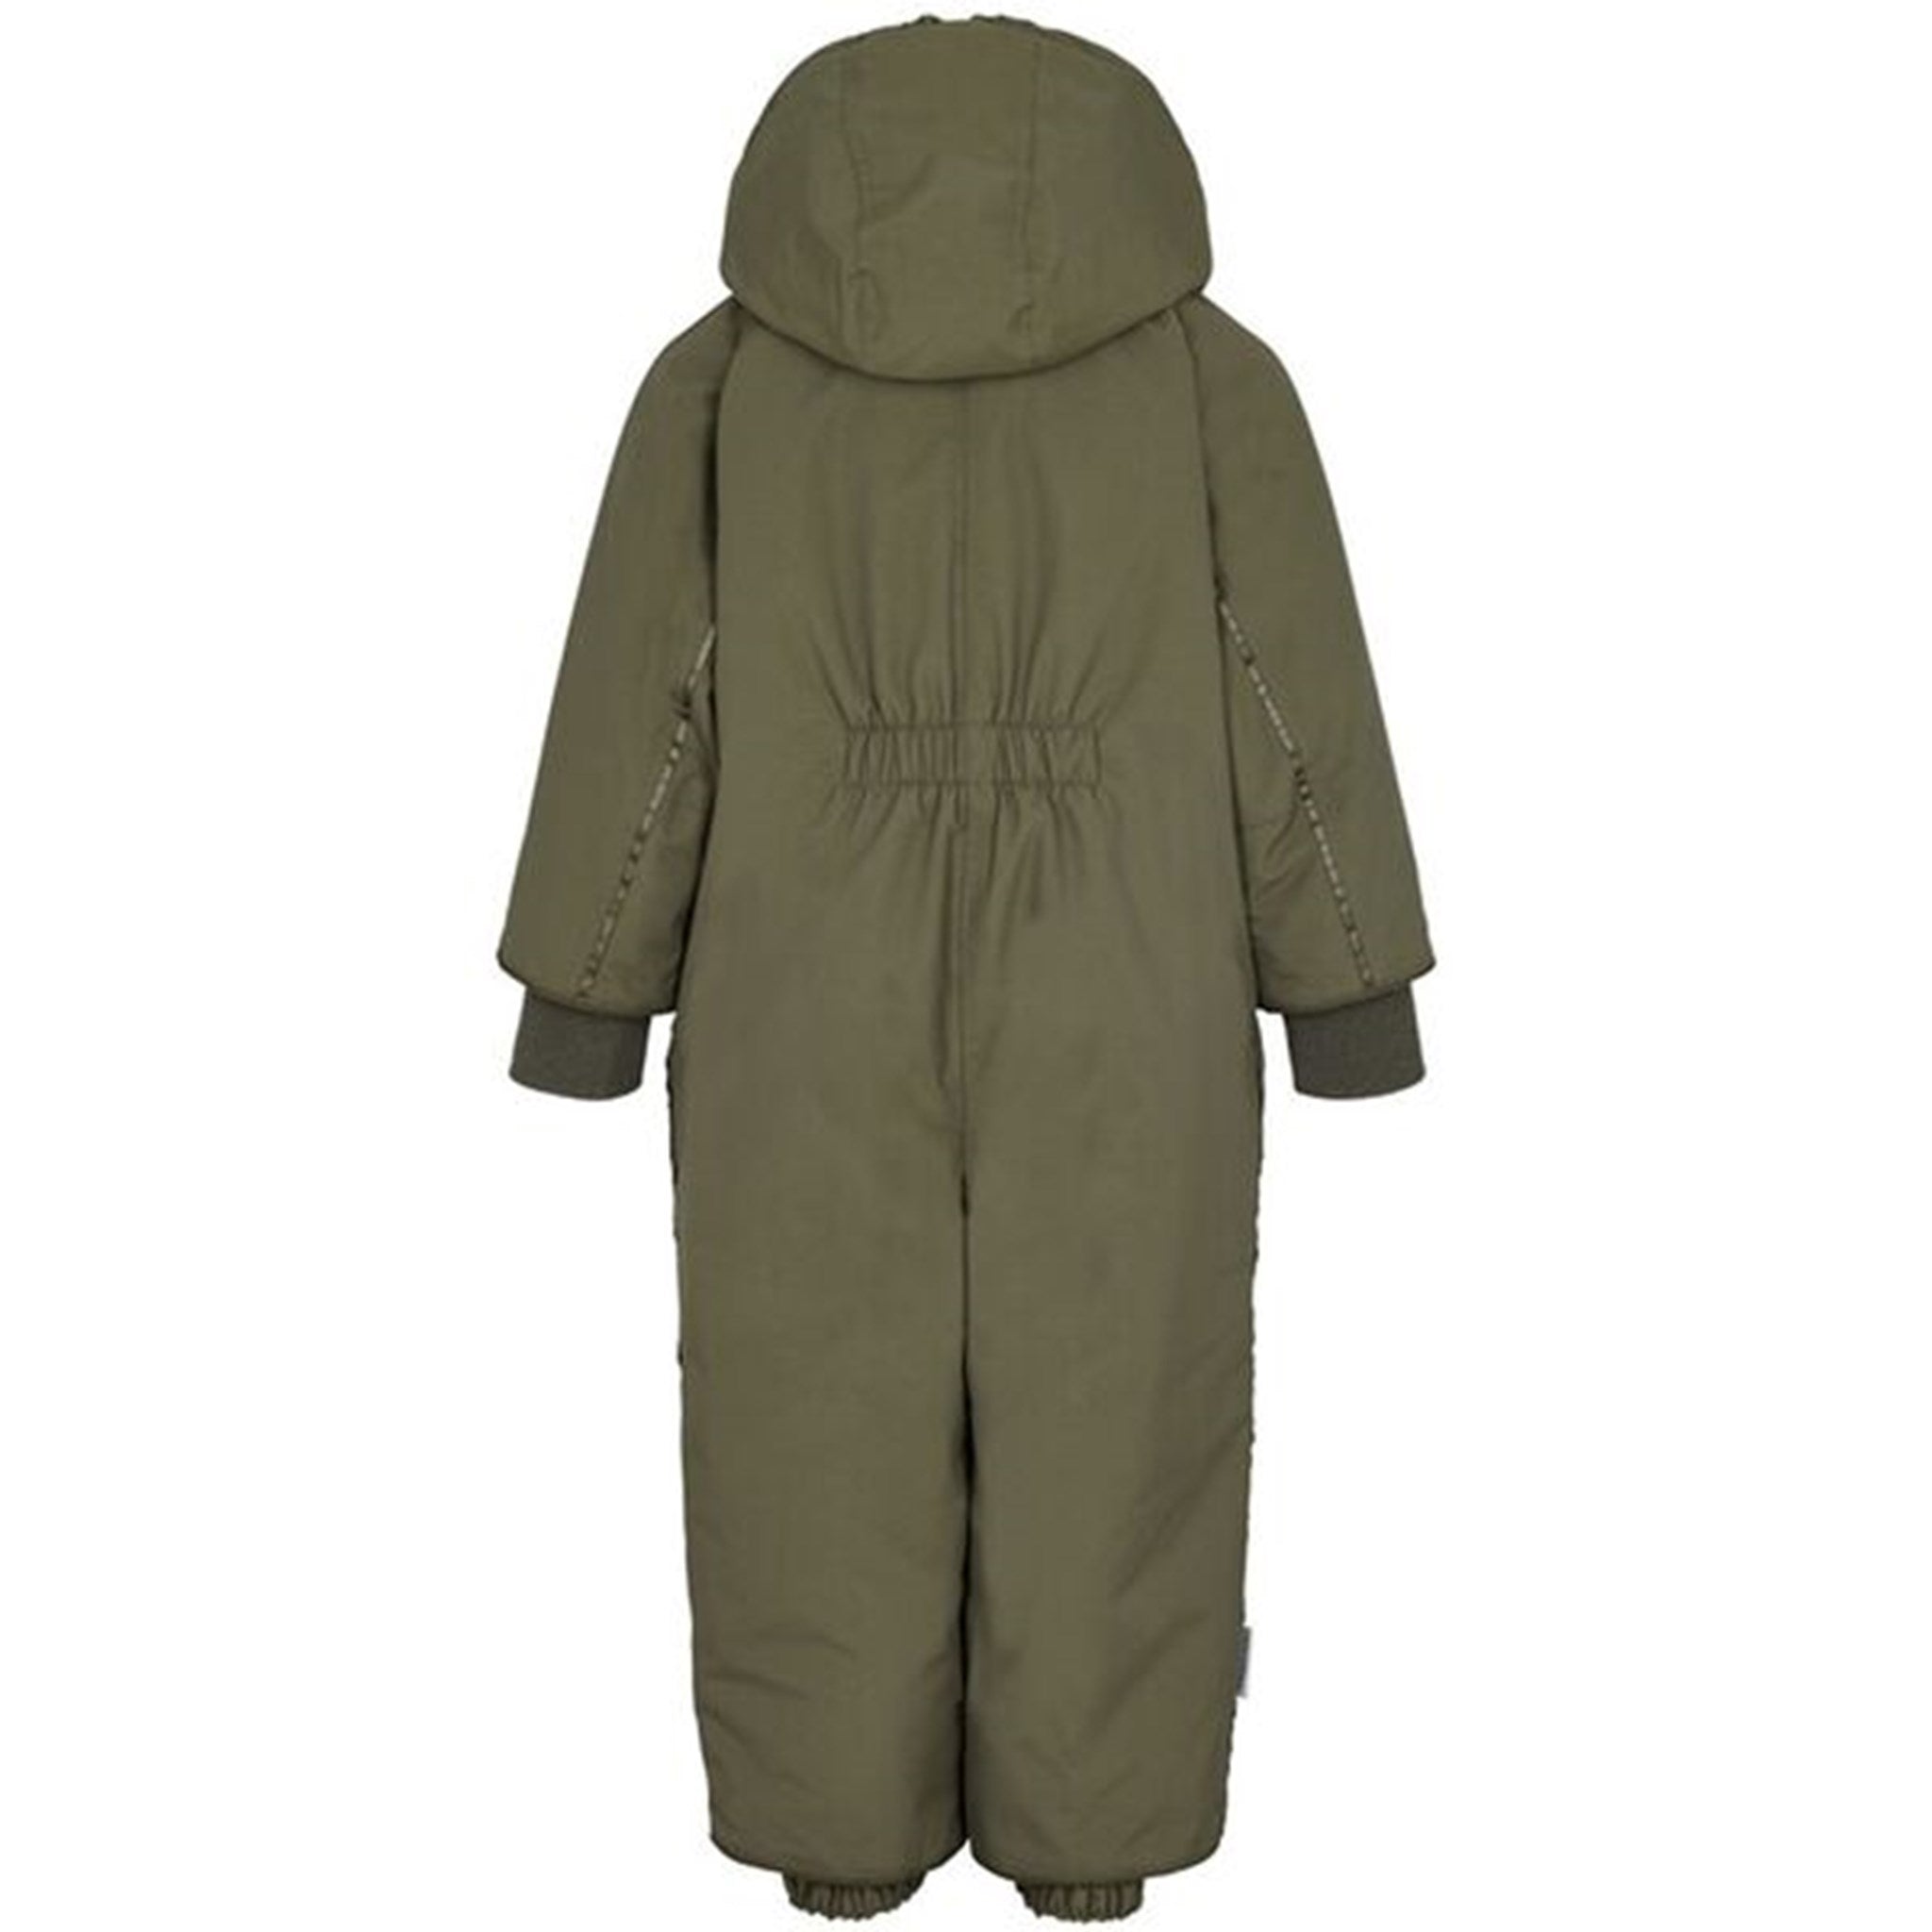 MarMar Overall Ollie Hunter Technical Outerwear 2